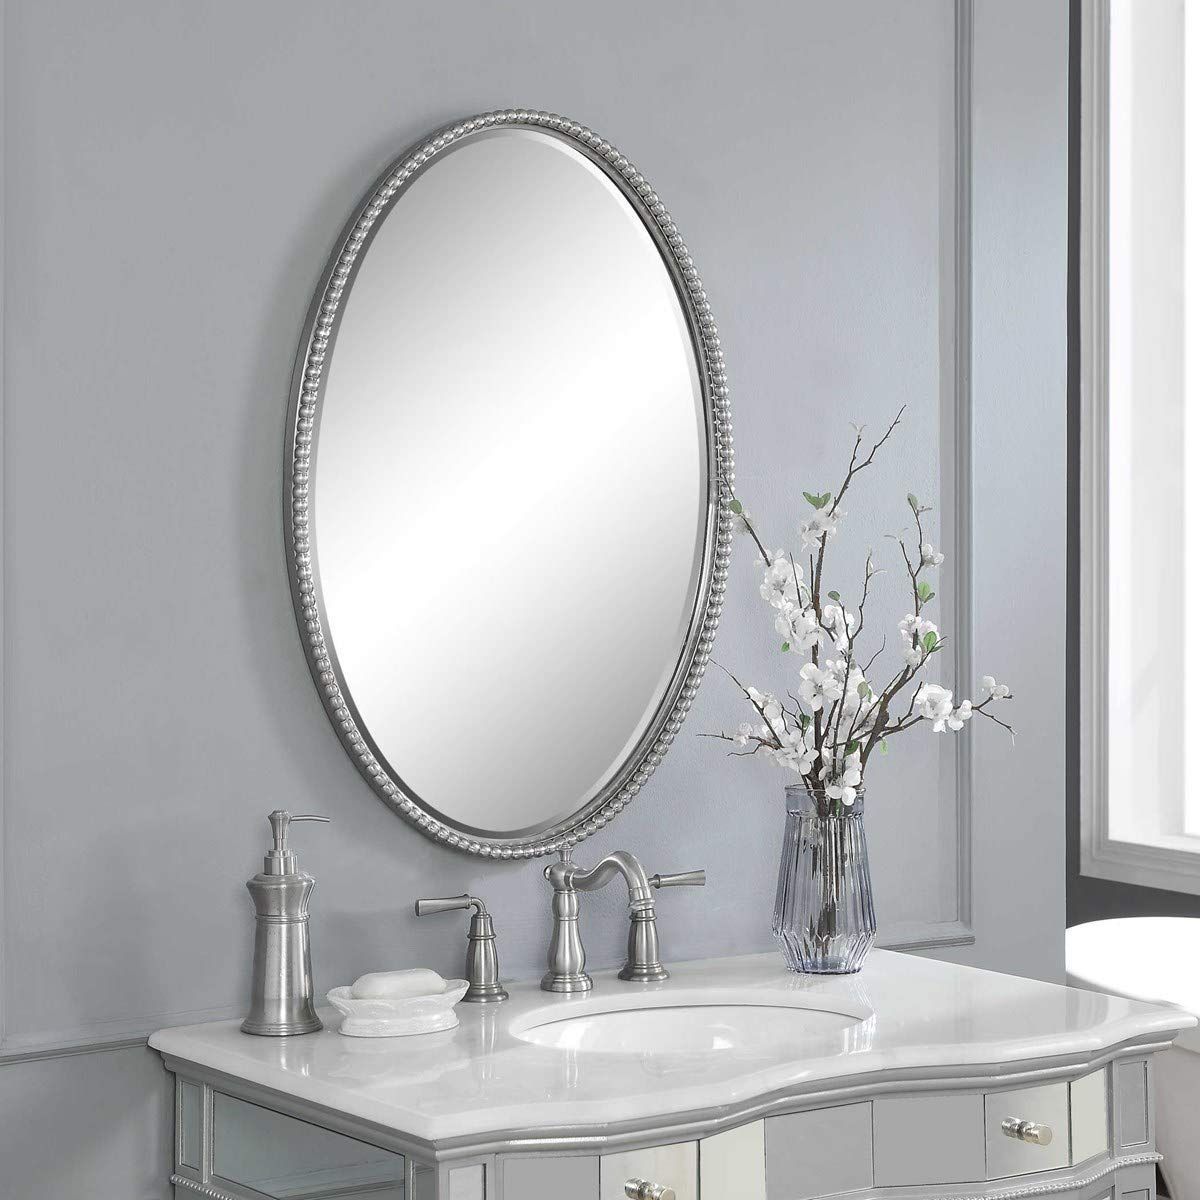 Uttermost' 01102 Sherise Oval Brushed Nickel Beaded Wall Mirror Regarding Nickel Framed Oval Wall Mirrors (View 10 of 15)